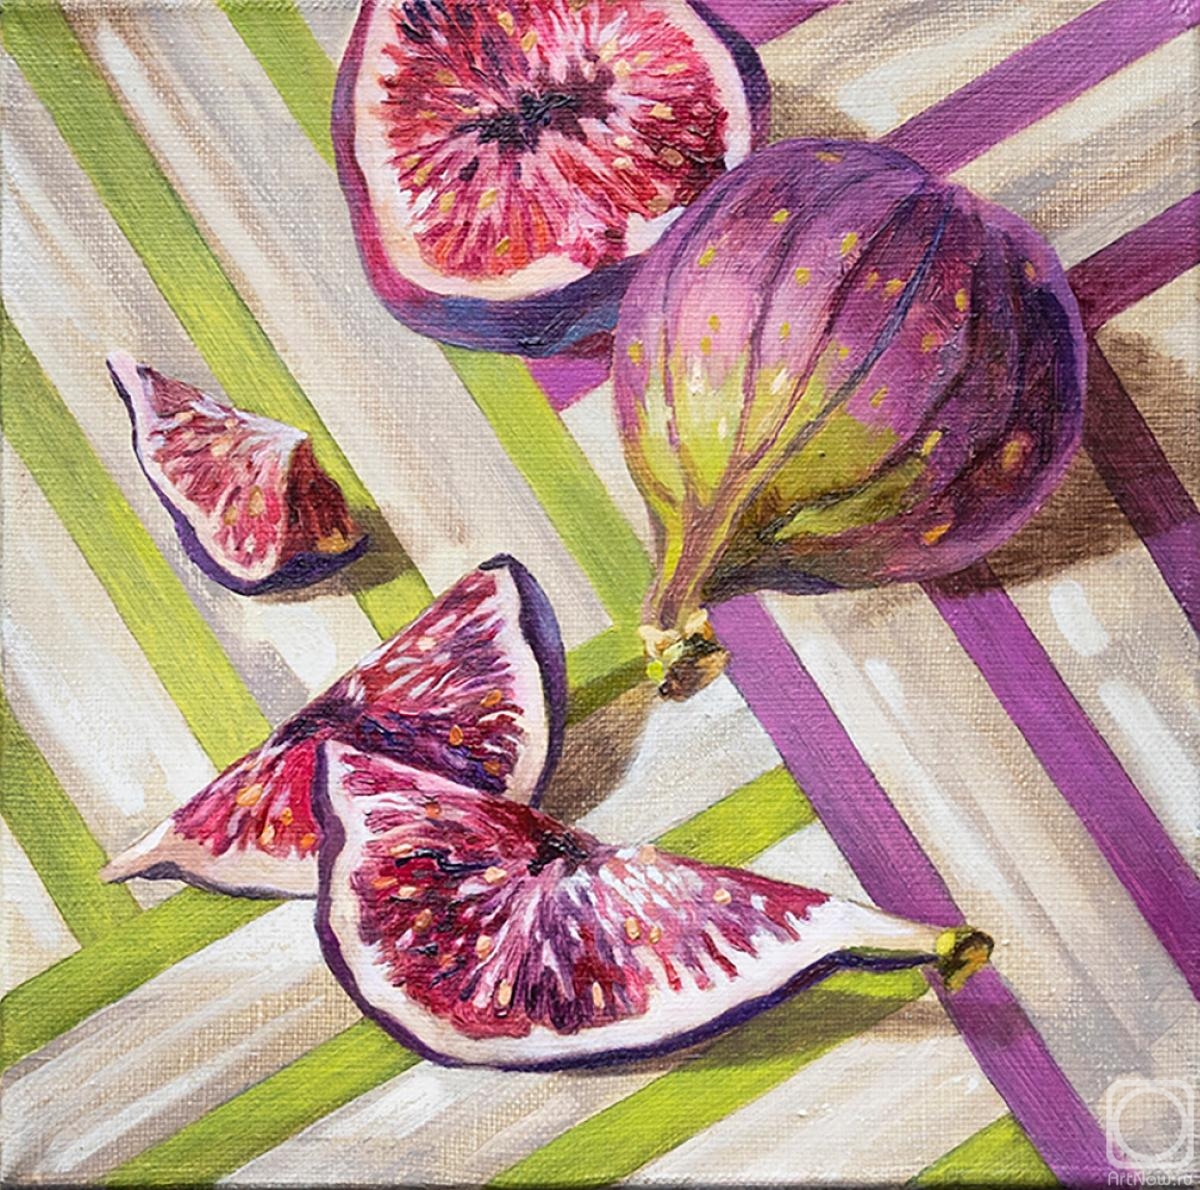 Meltsaeva Mariia. Sweet figs from series Stripes go well with everything